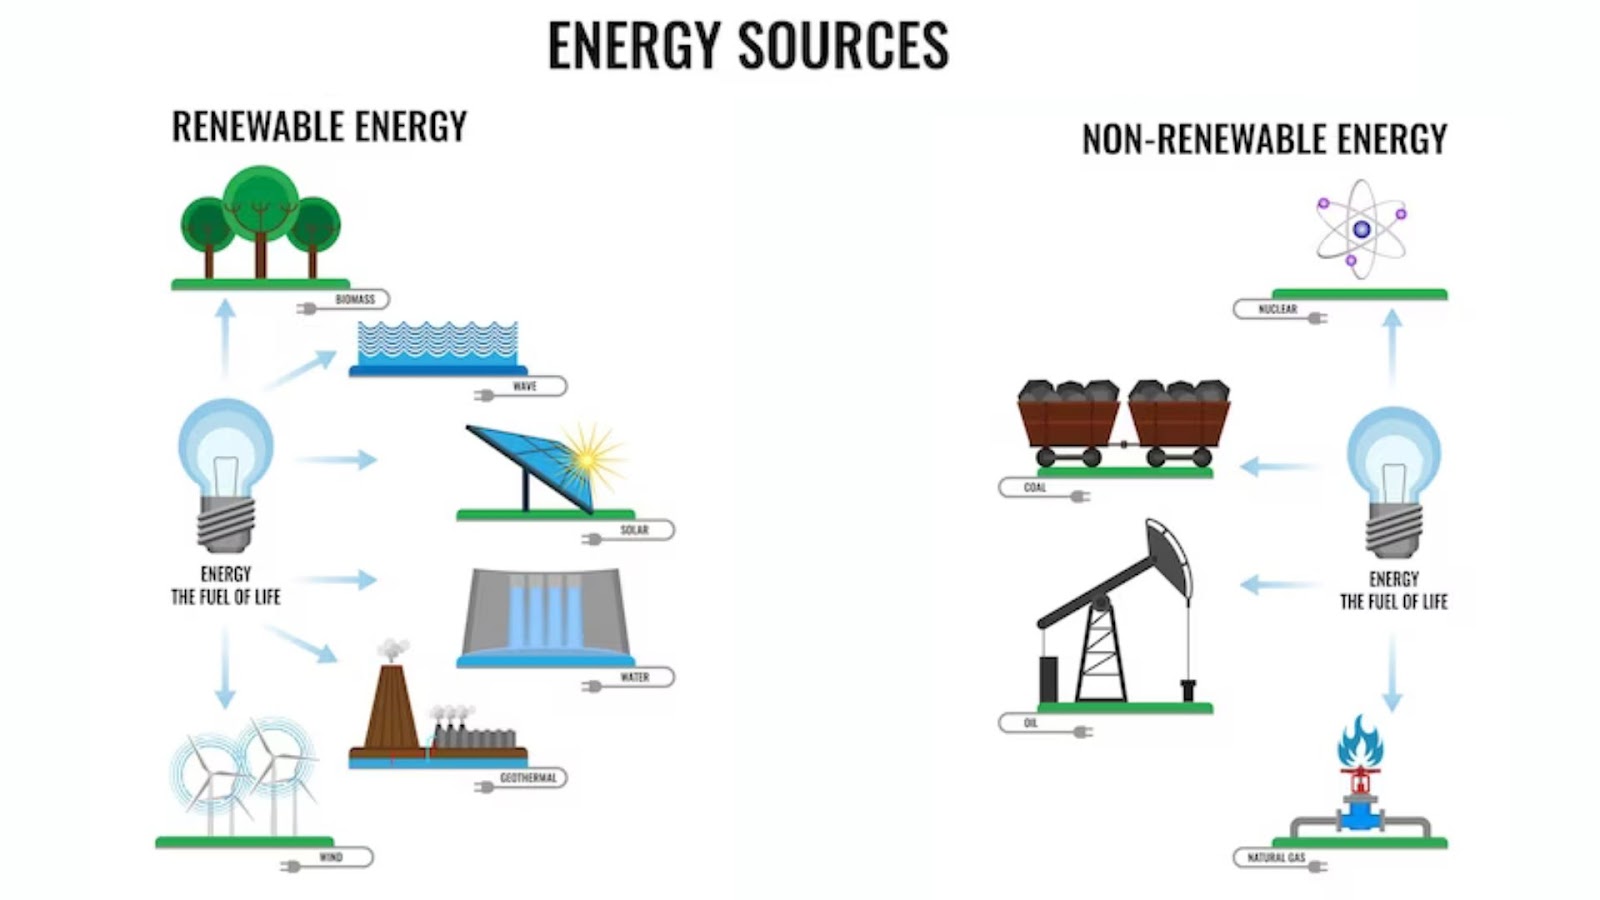 In what way does renewable energy differ from nonrenewable energy?